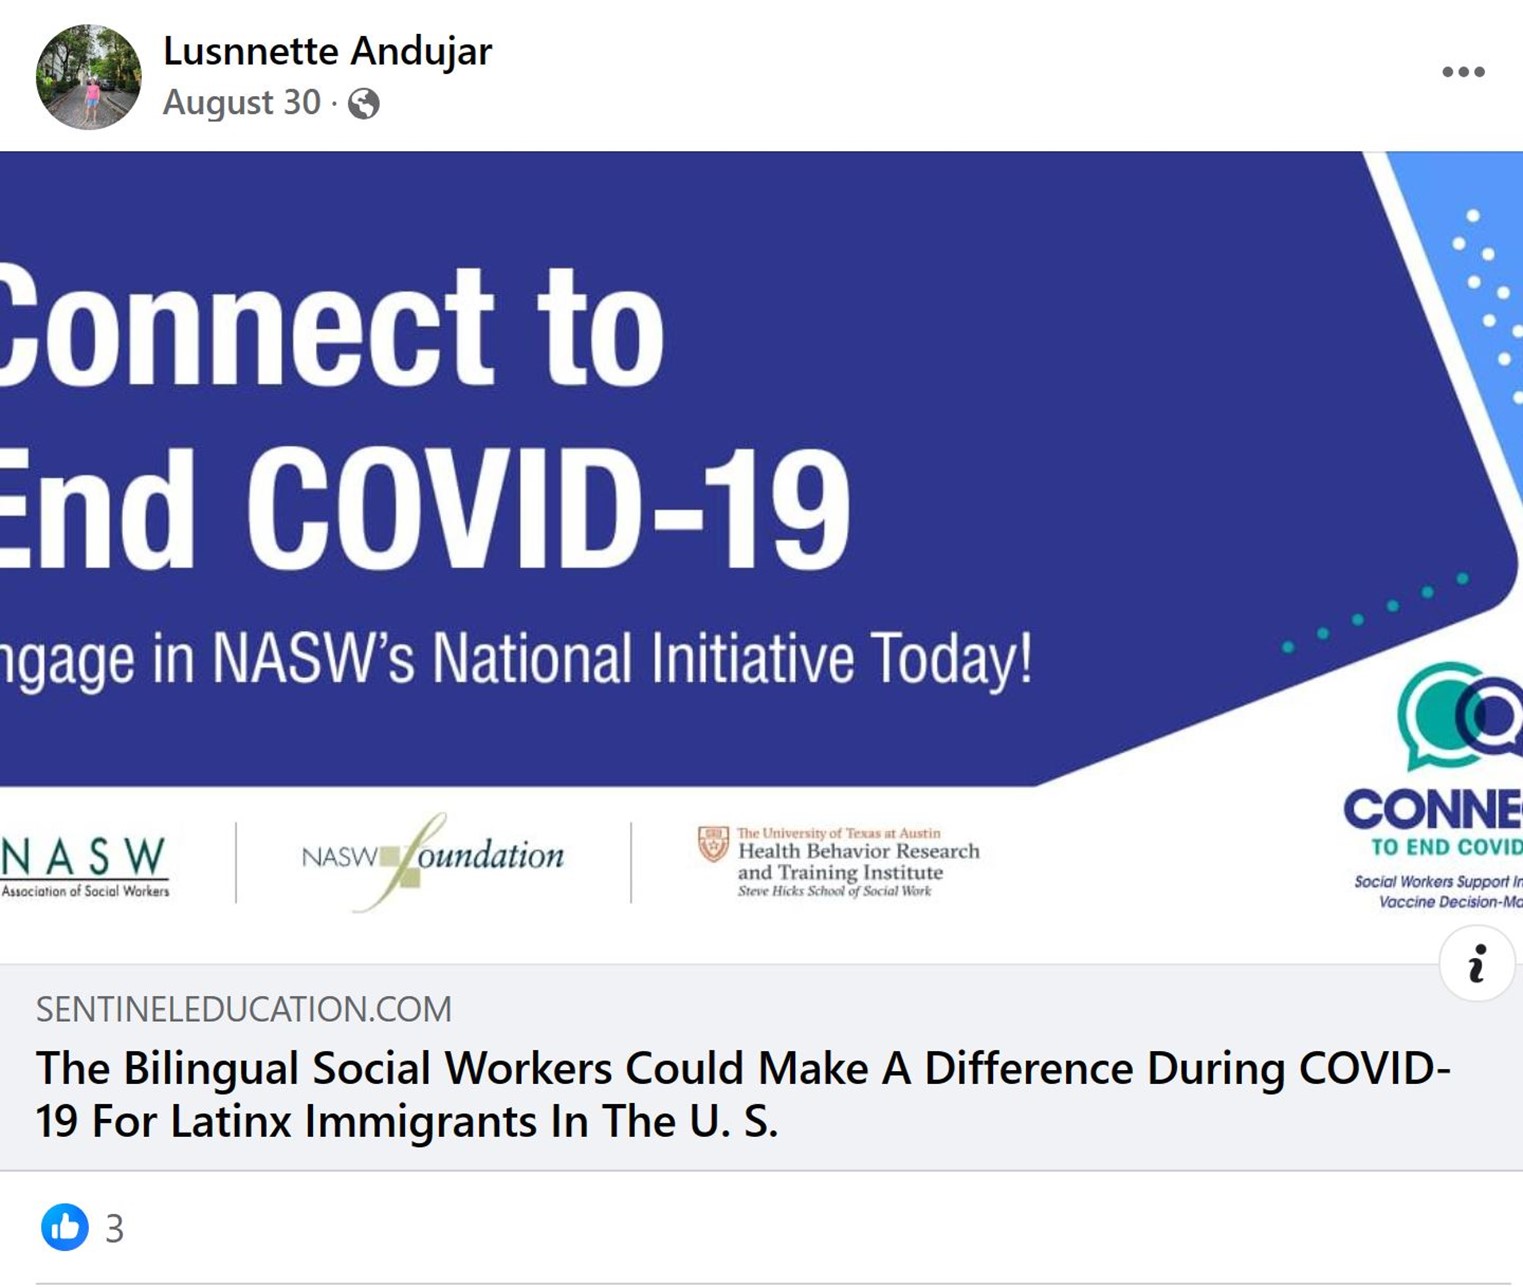 facebook post by Lusnnette Andujar shared from sentineleducation.com titled The Bilingual Social Workers could make a difference during COVID-19 for latinx immigrants in the US with the Connect to End COVID-19 logo